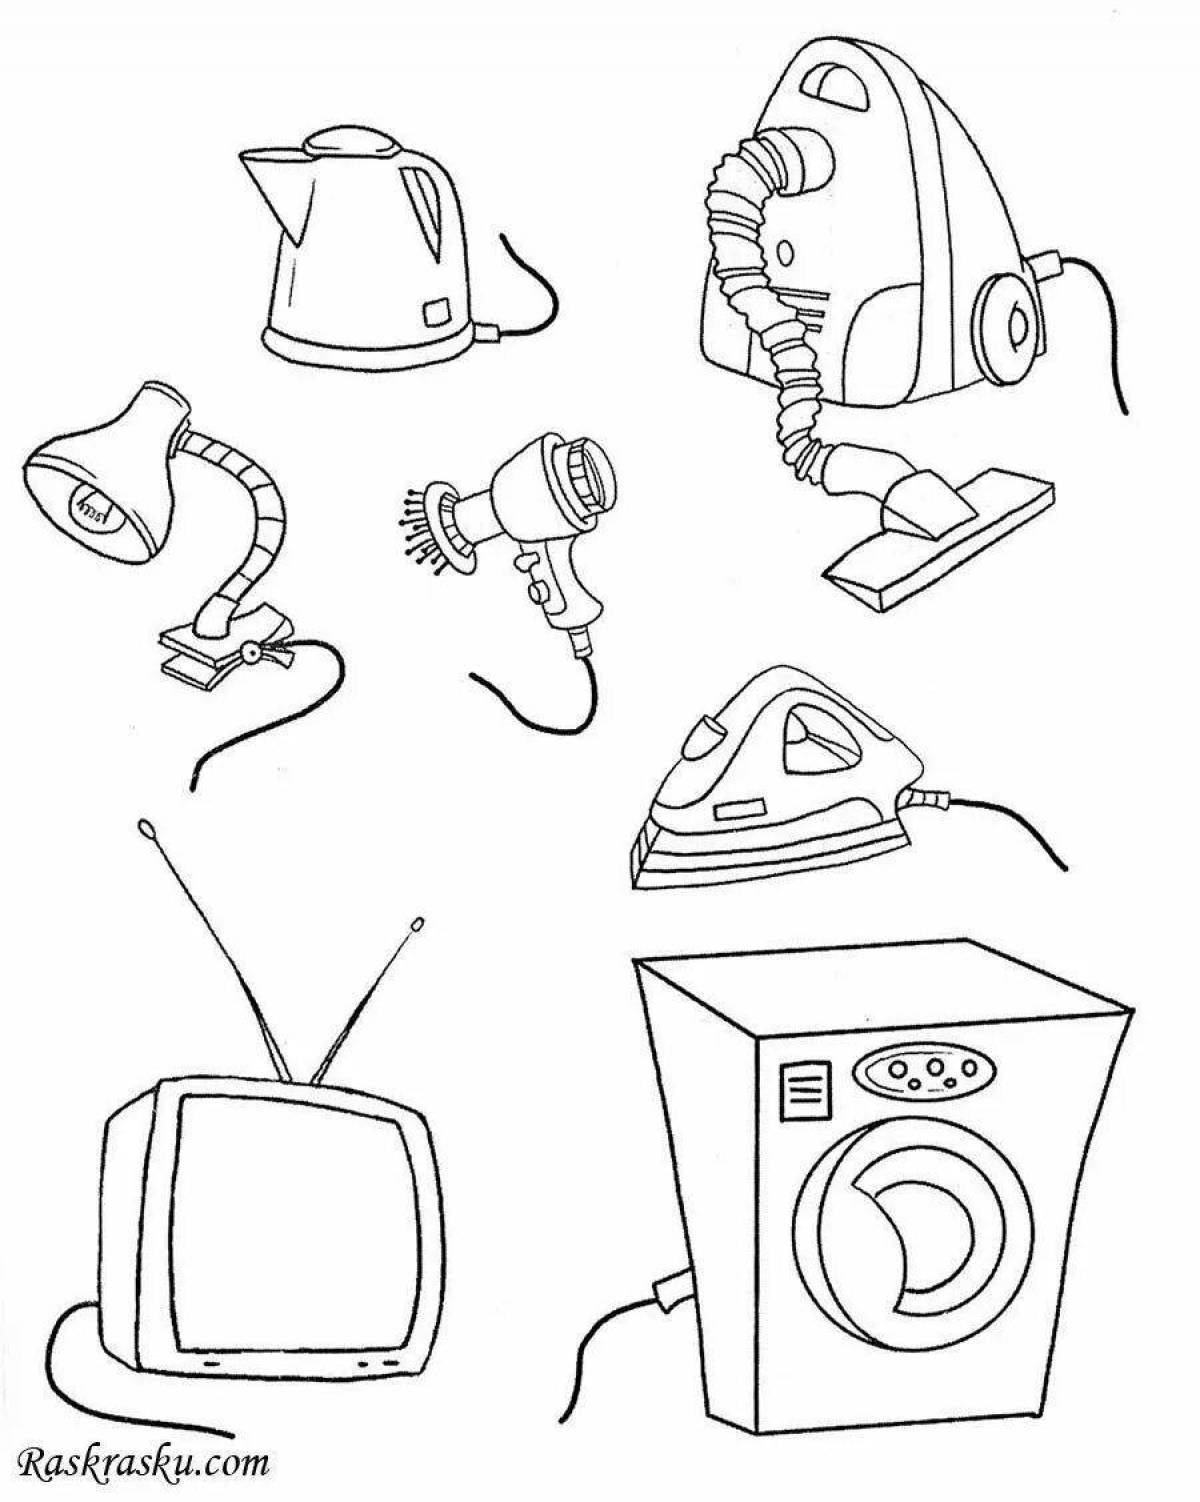 Colourful coloring book household appliances for children 4-5 years old